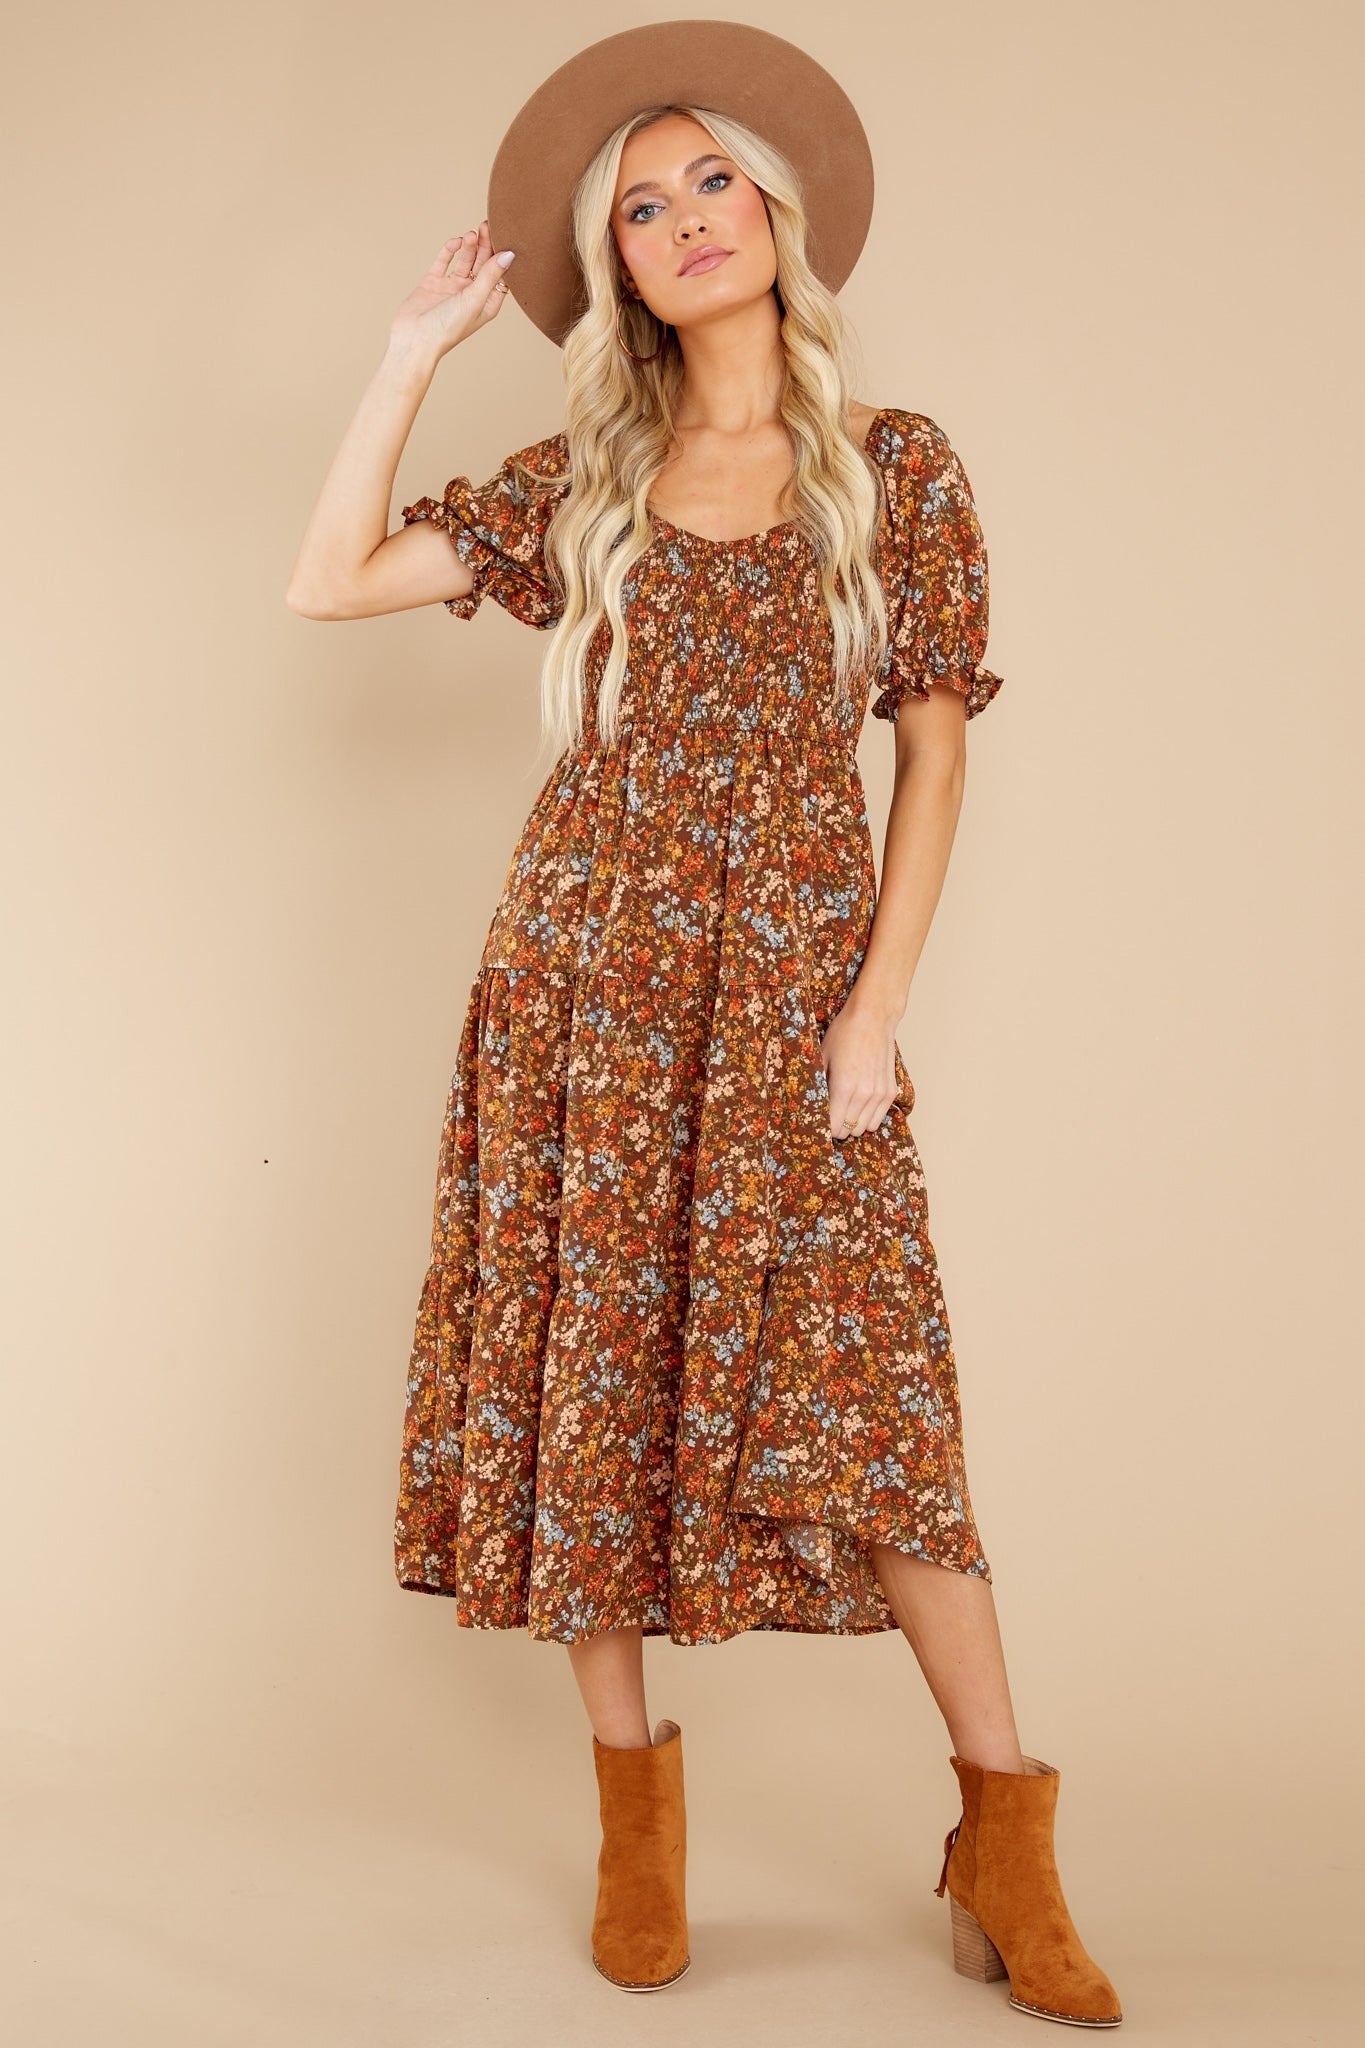 Easy To Love Brown Floral Midi Dress